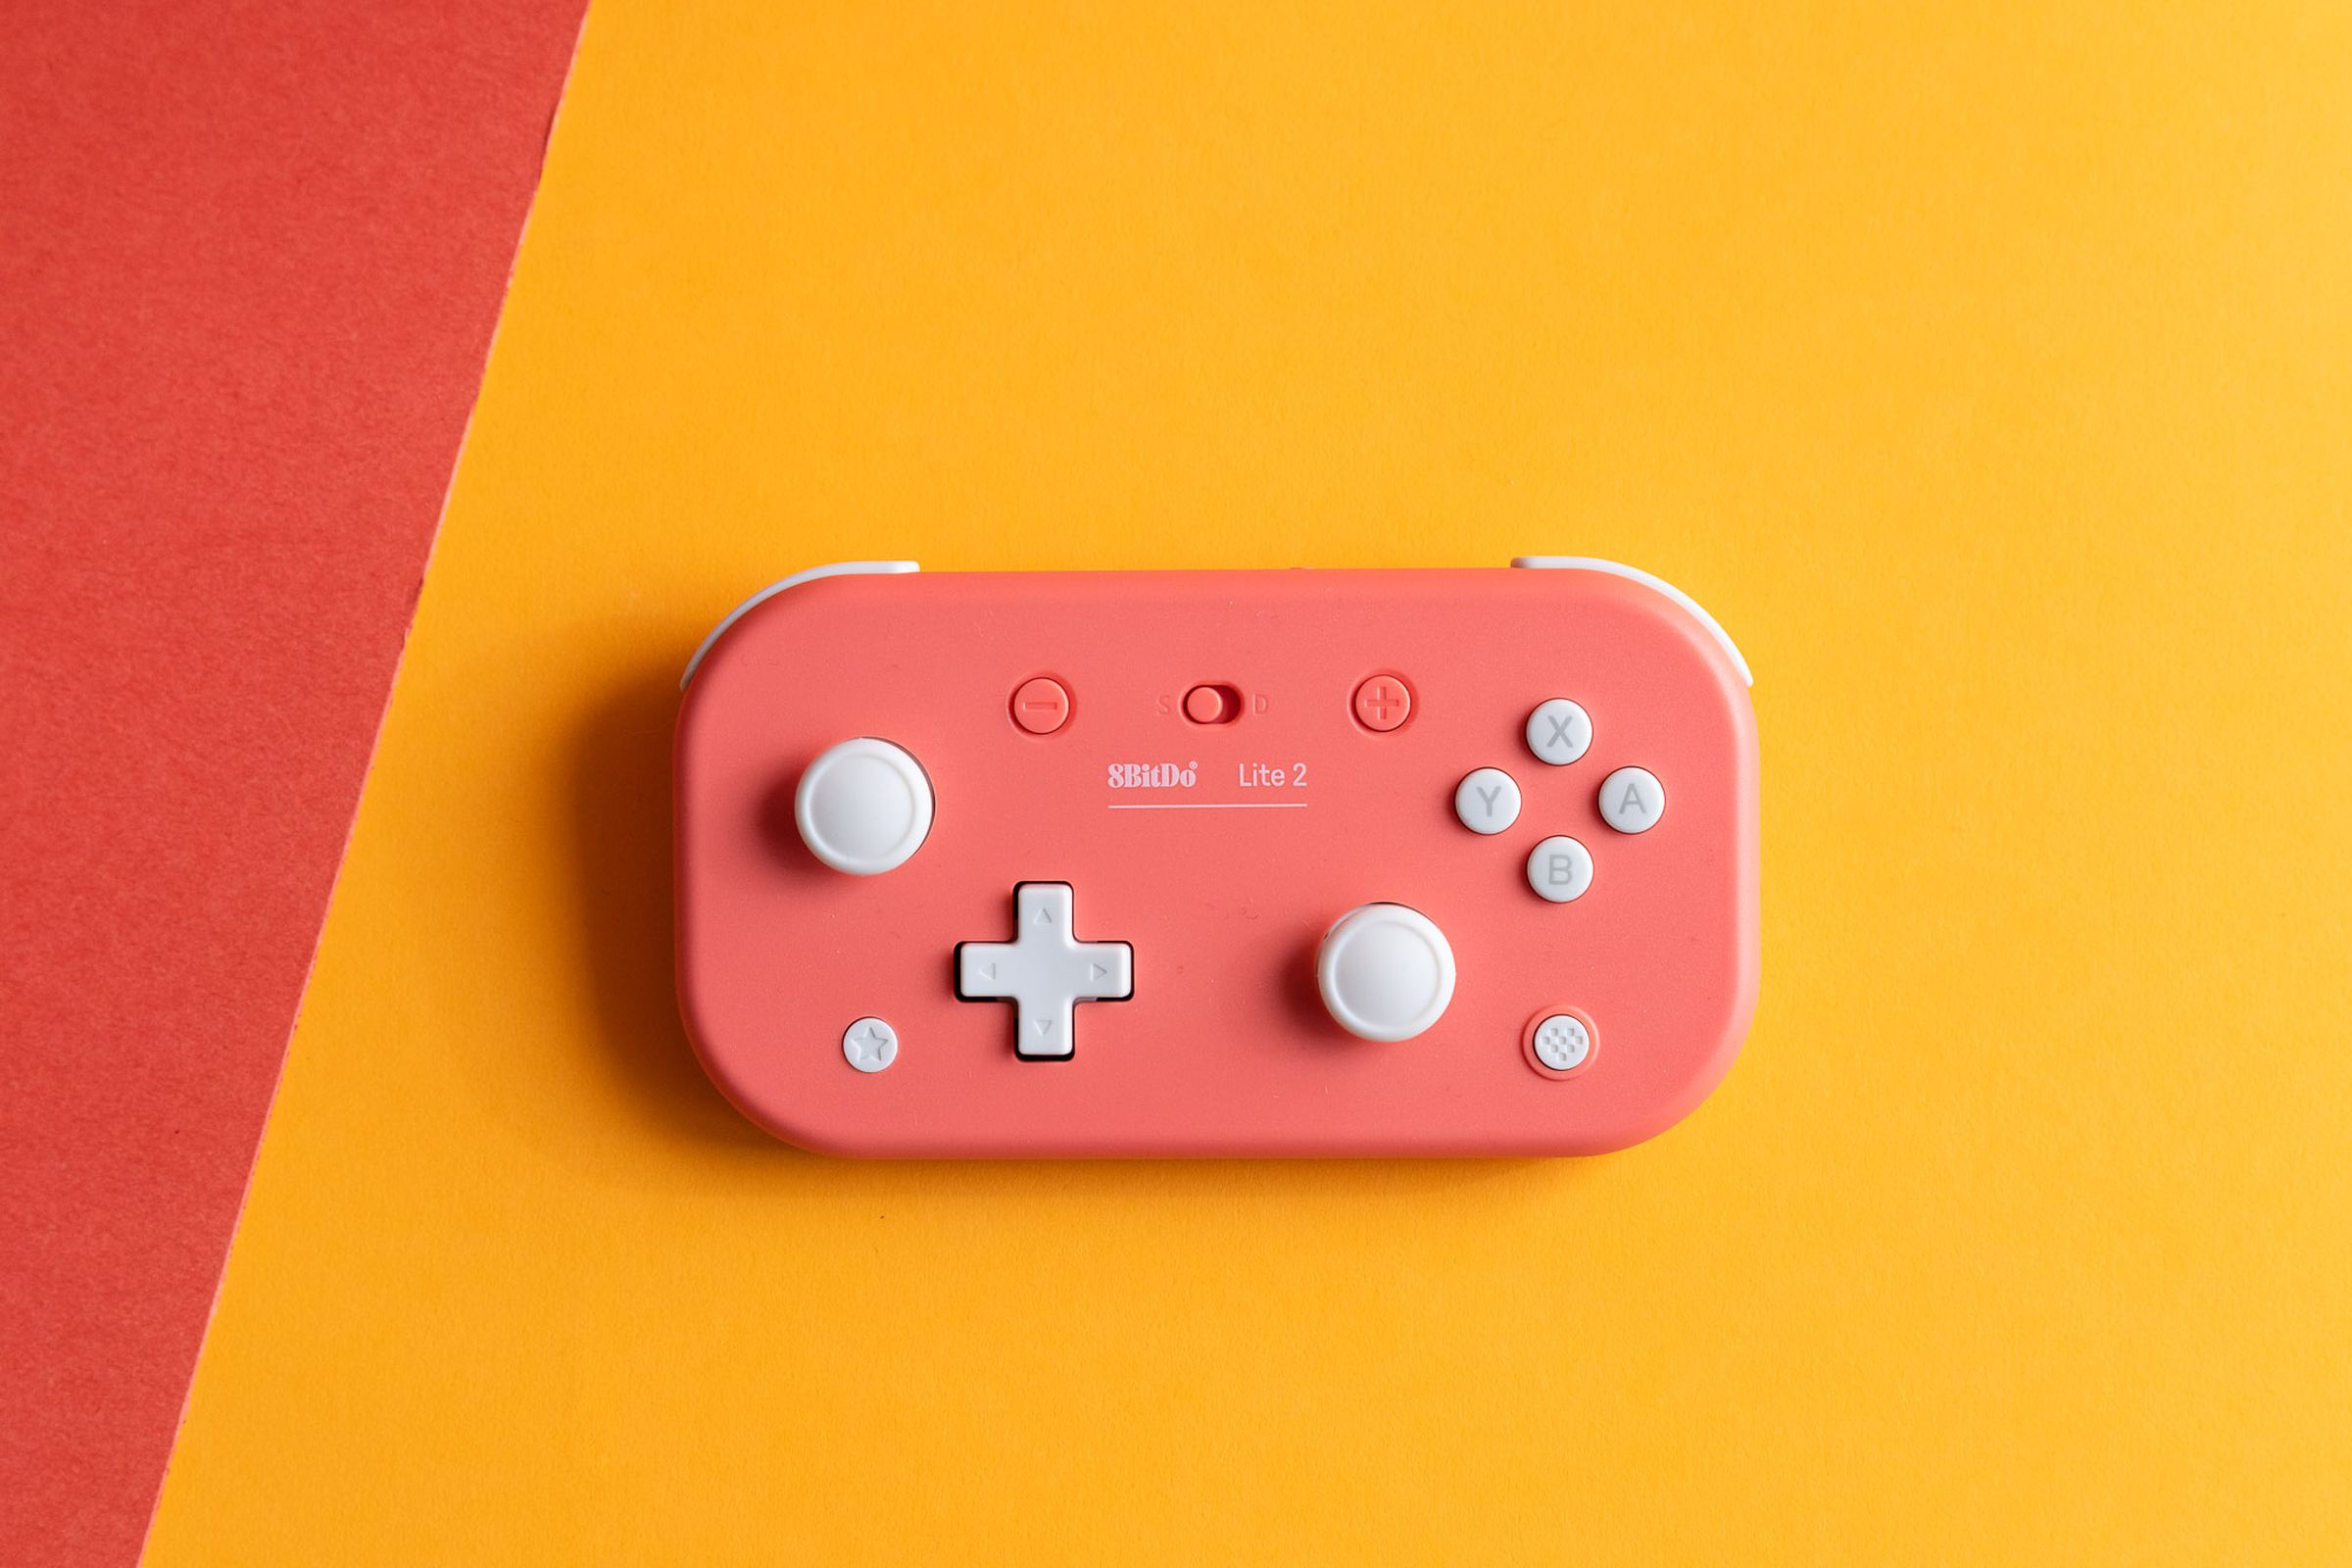 The pink 8BitDo Lite 2 wireless controller for the Nintendo Switch and other platforms sitting on a yellow and red back drop.